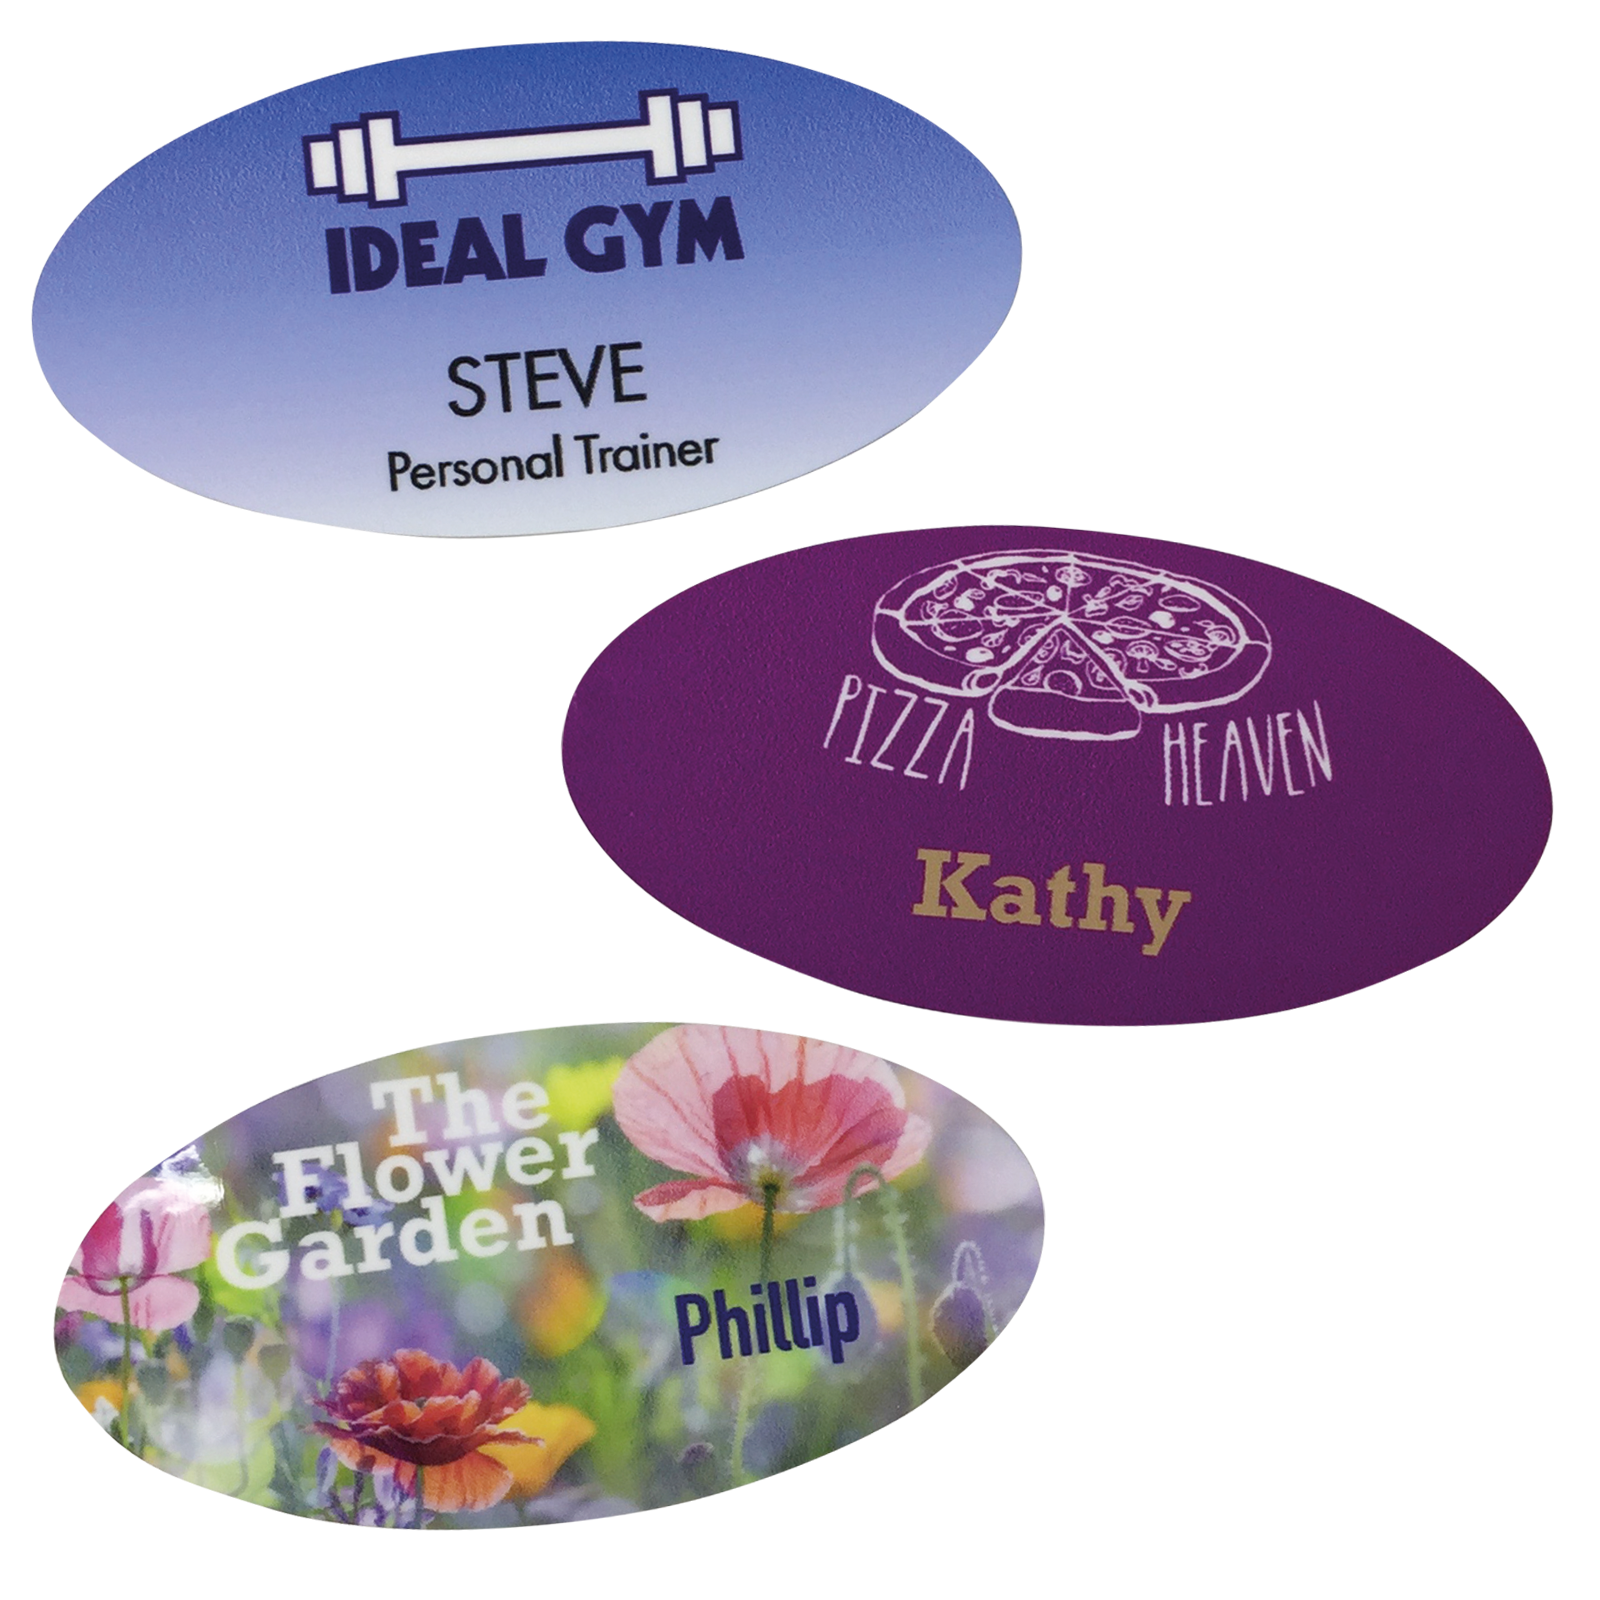 Oval Staff Name Badges - 76 x 38mm